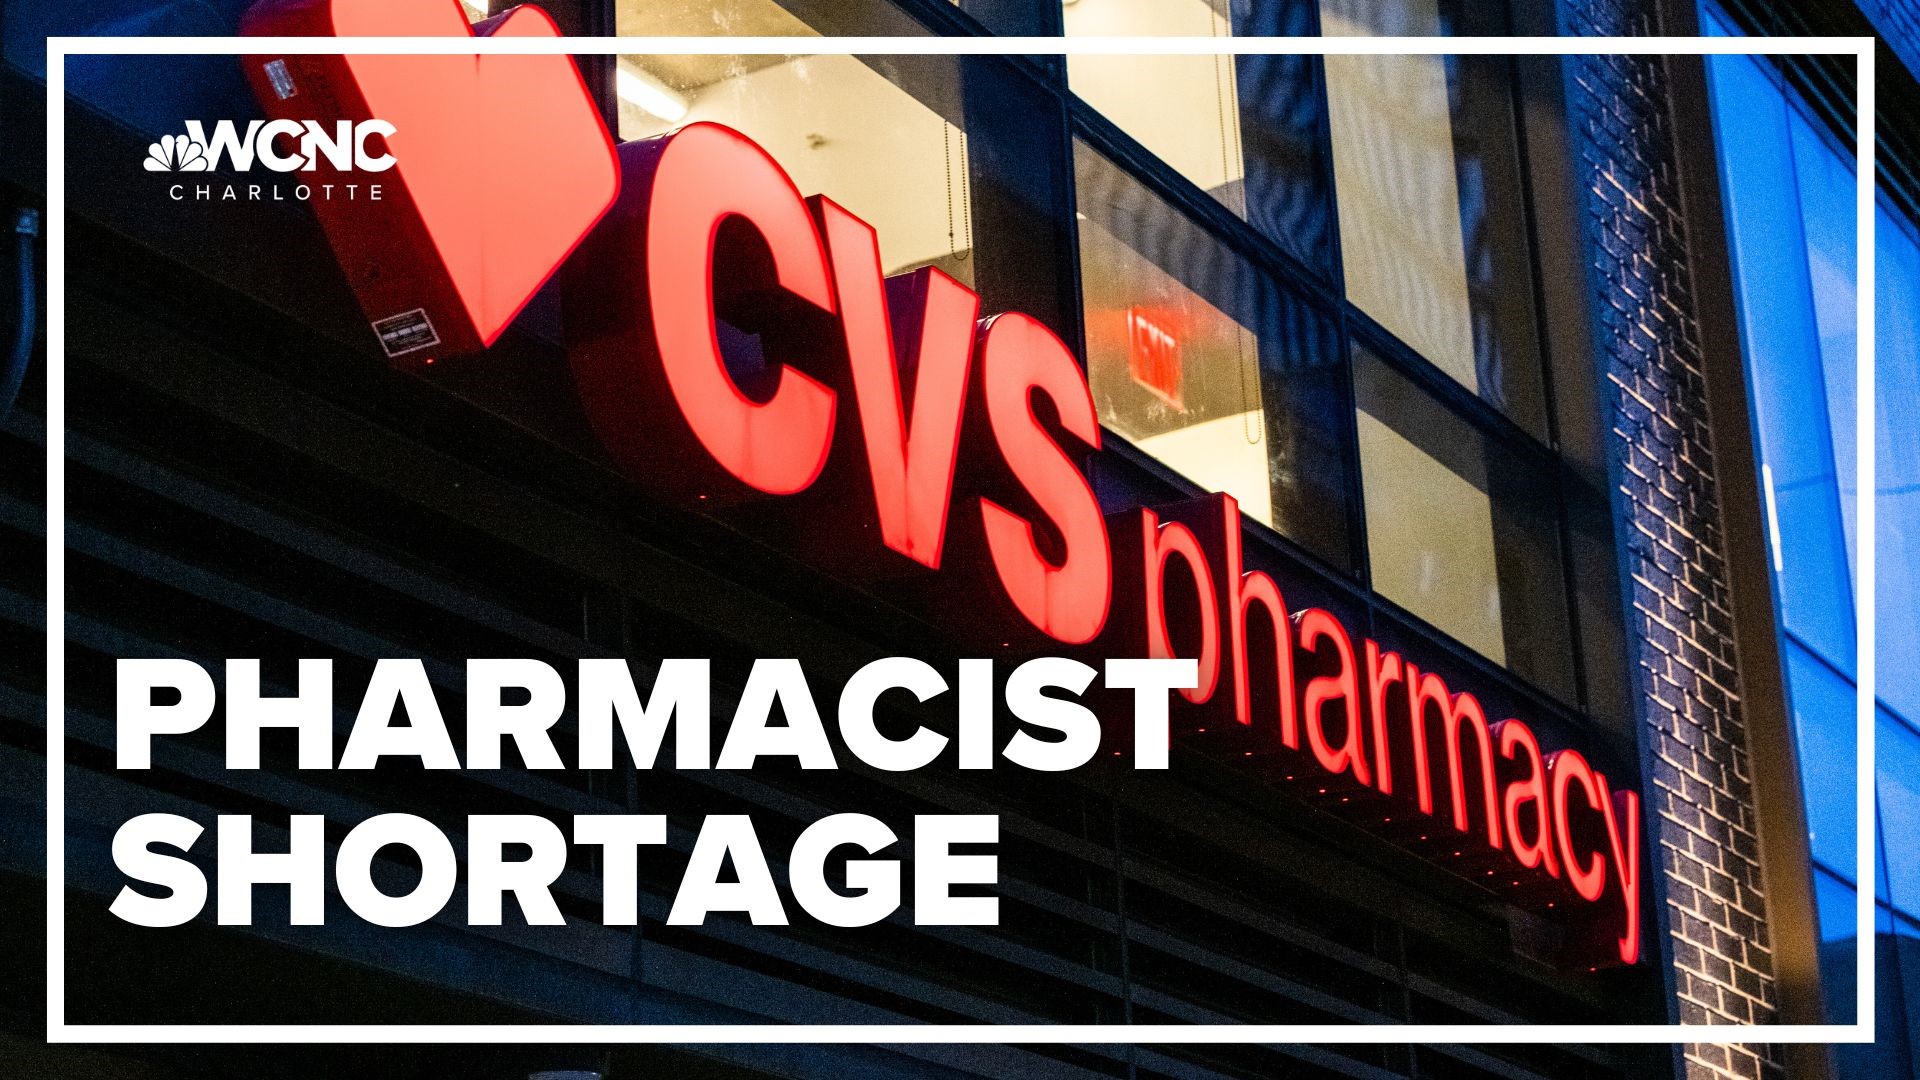 Walmart and CVS announced they will reduce pharmacy hours to improve work-life balance for employees.